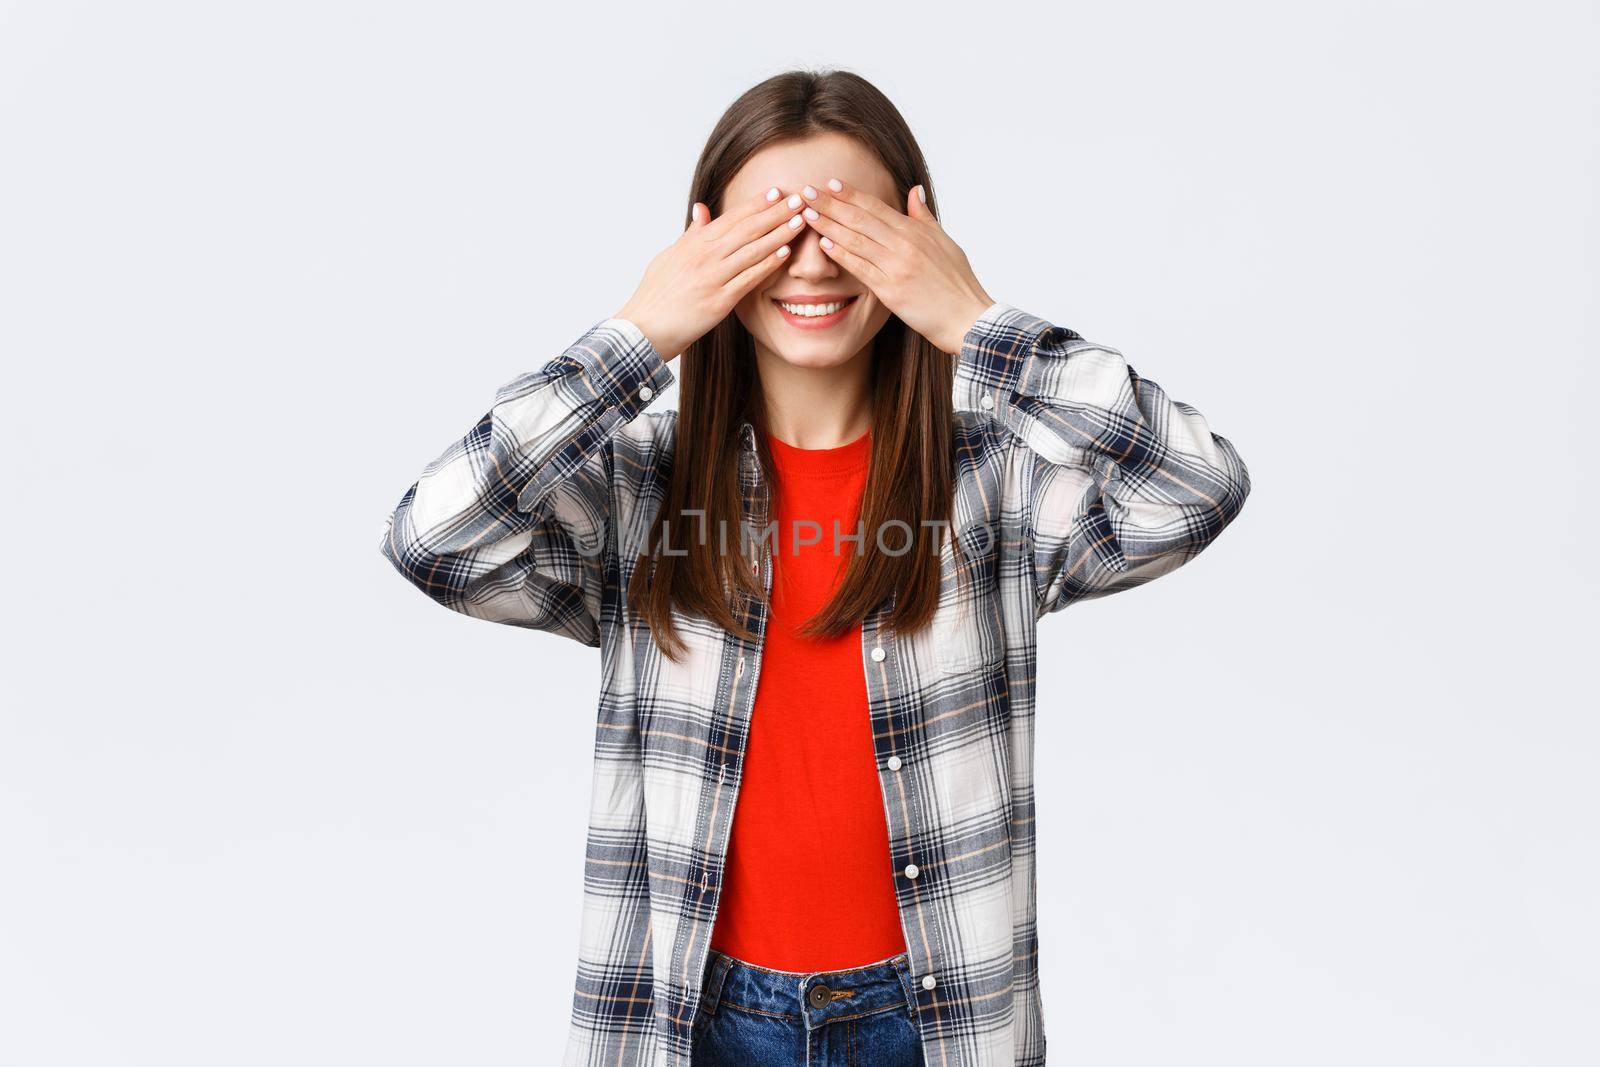 Lifestyle, different emotions, leisure activities concept. Excited happy young relaxed girl promise not peek. Woman cover eyes with palms, playing hide n seek or waiting for surprise.